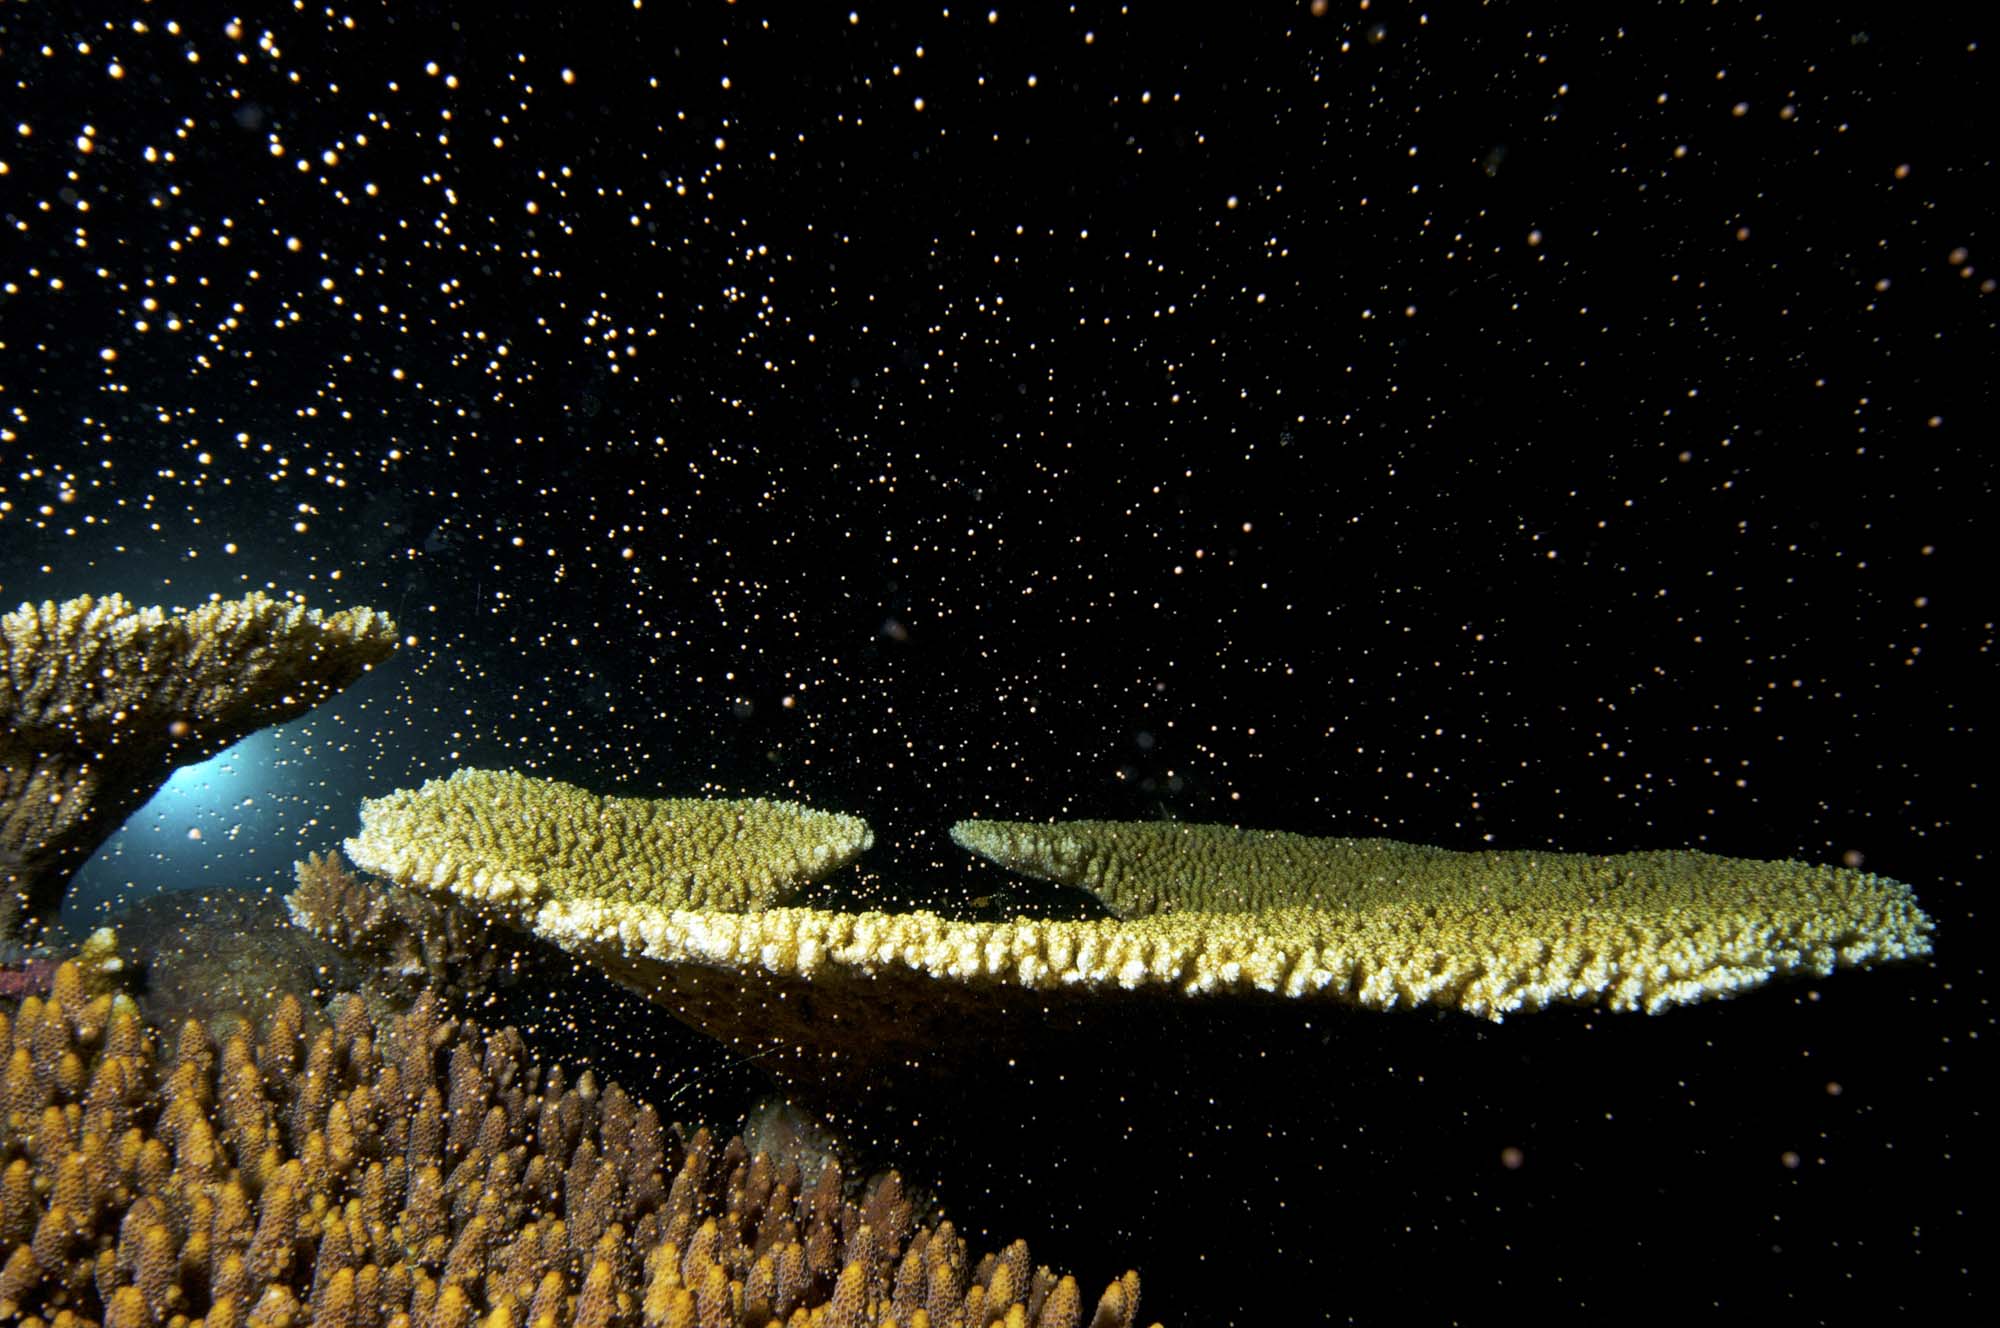 Coral spawning, Great Barrier Reef, Queensland